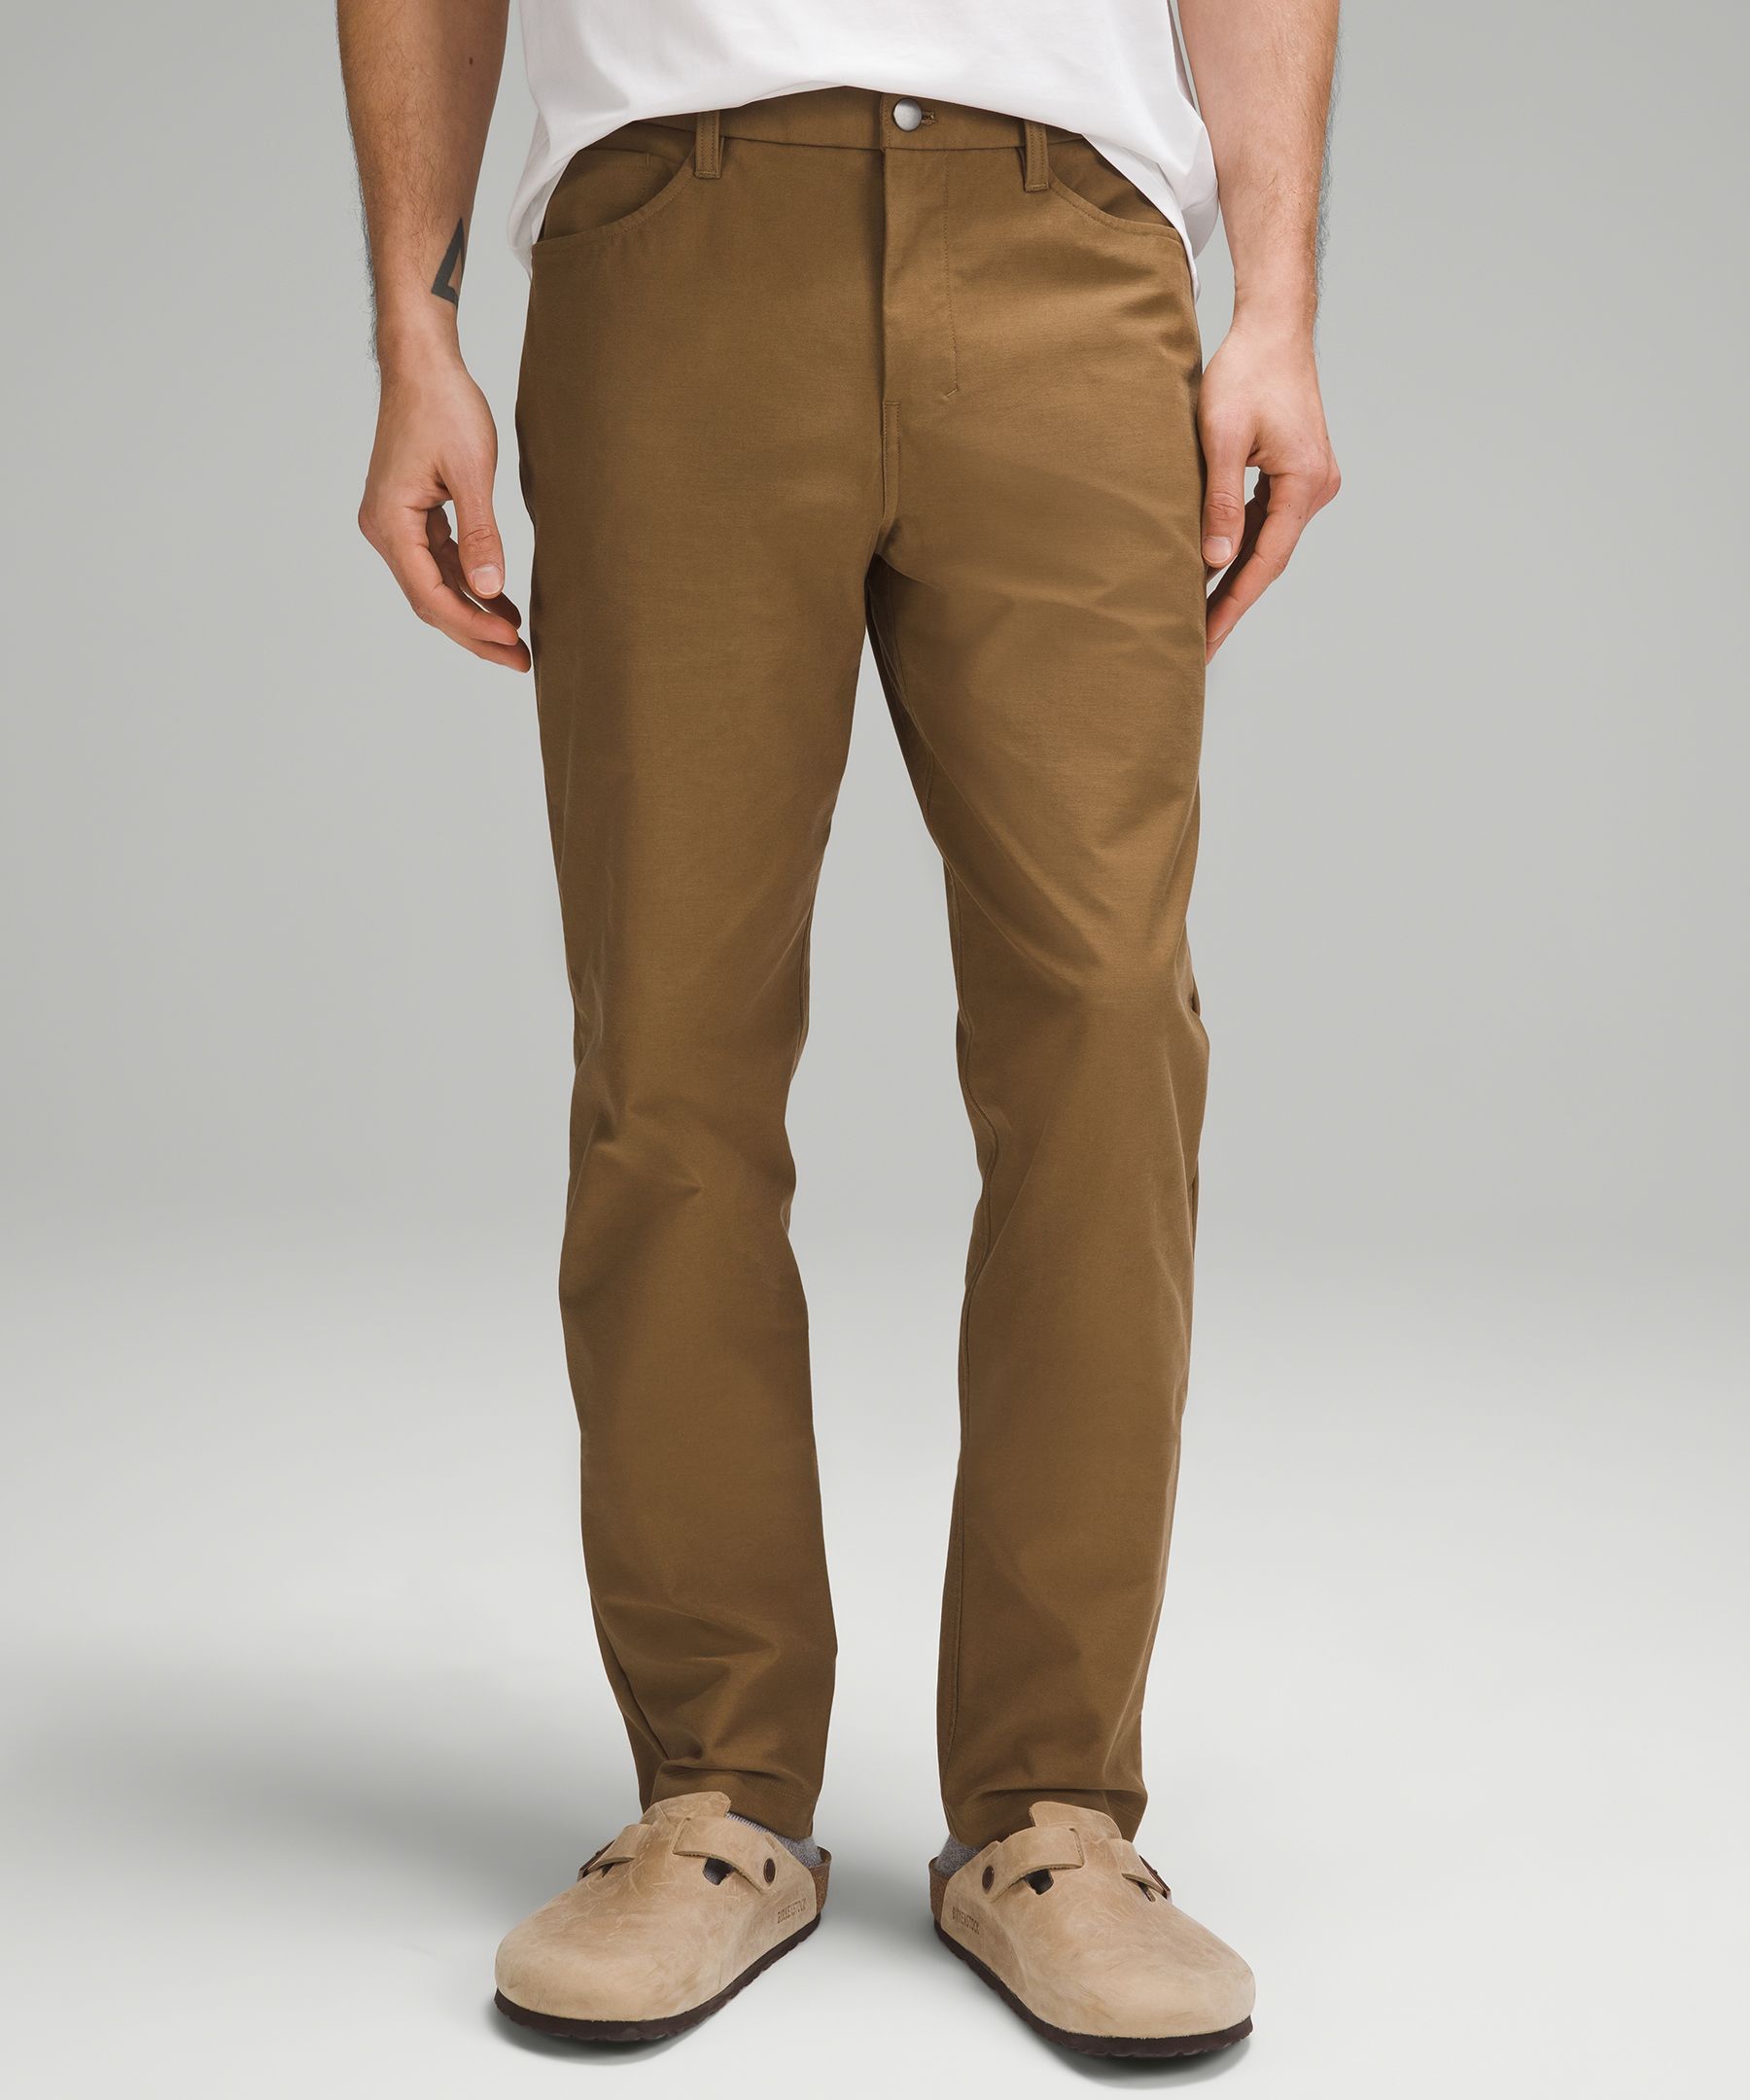 The word for today was layers: ABC Skinny-Fit Pant 32” * Utilitech